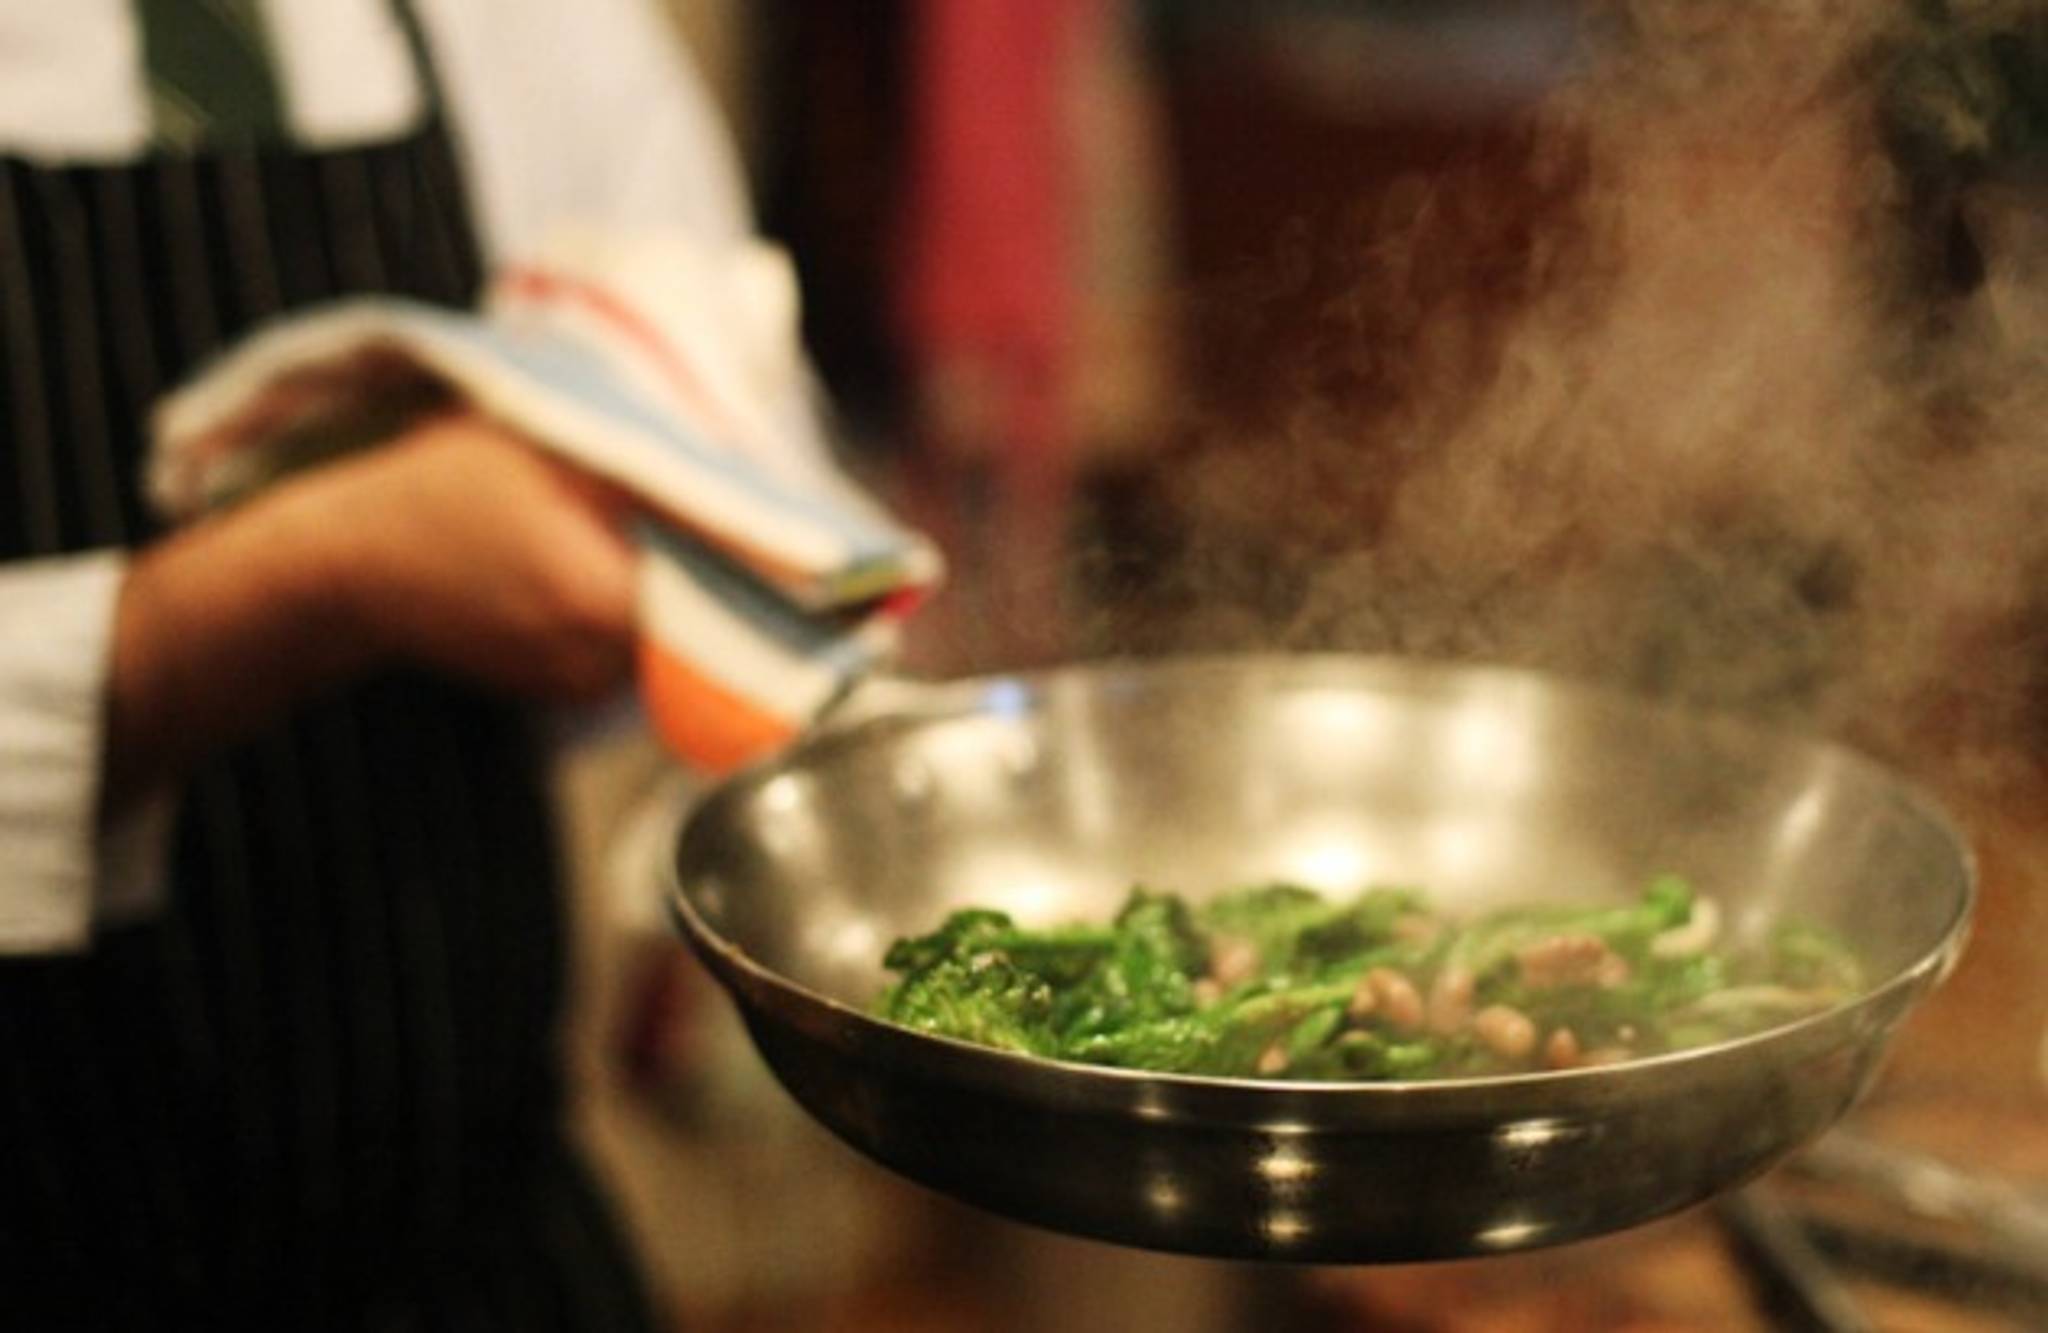 Kitchensurfing: making meals meaningful